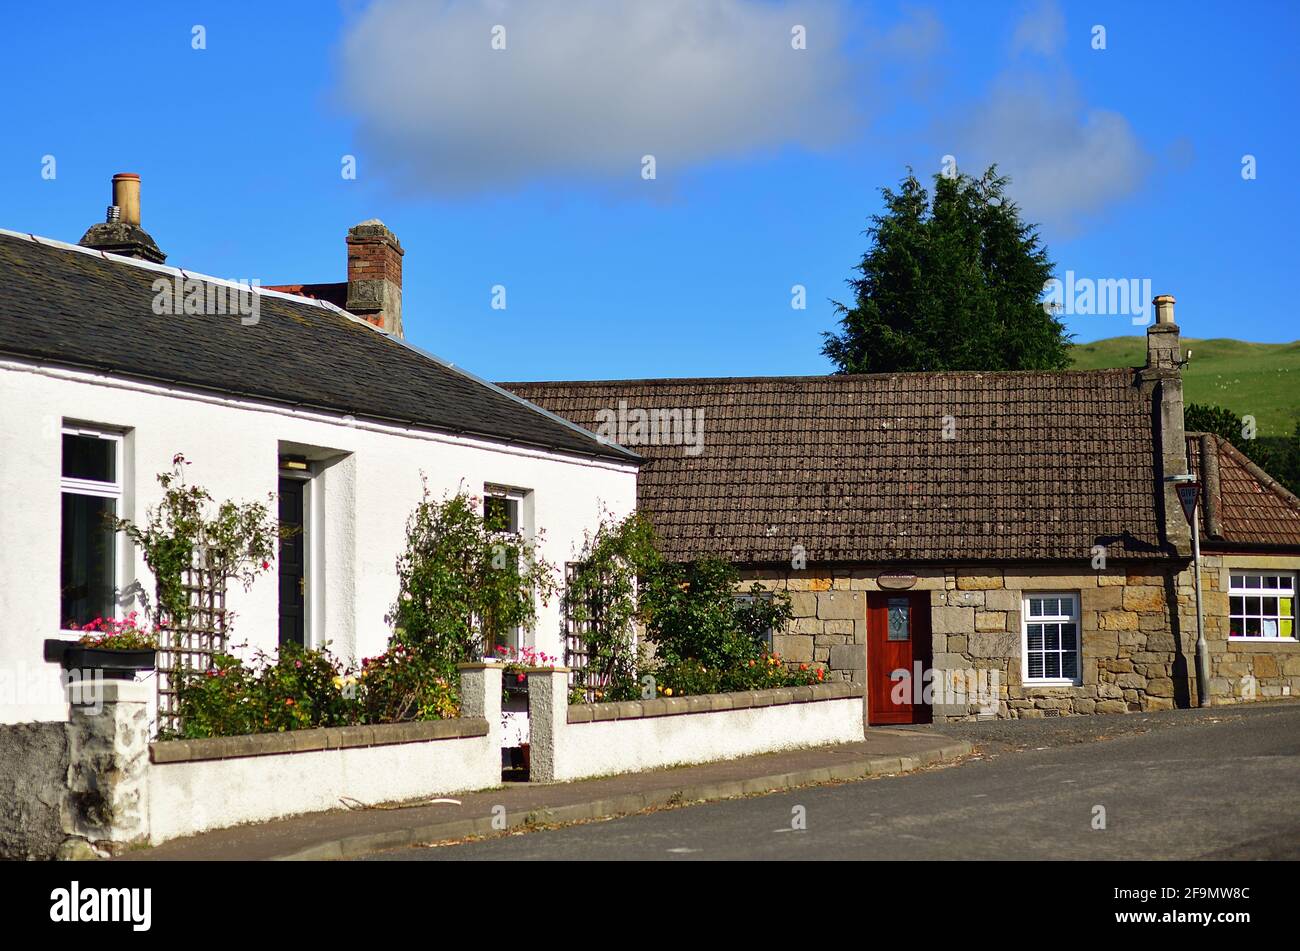 Saline, Fife, Scotland, United Kingdom. Tidy houses and street in the small village of Saline, Scotland on a sunny early autumn day. Stock Photo